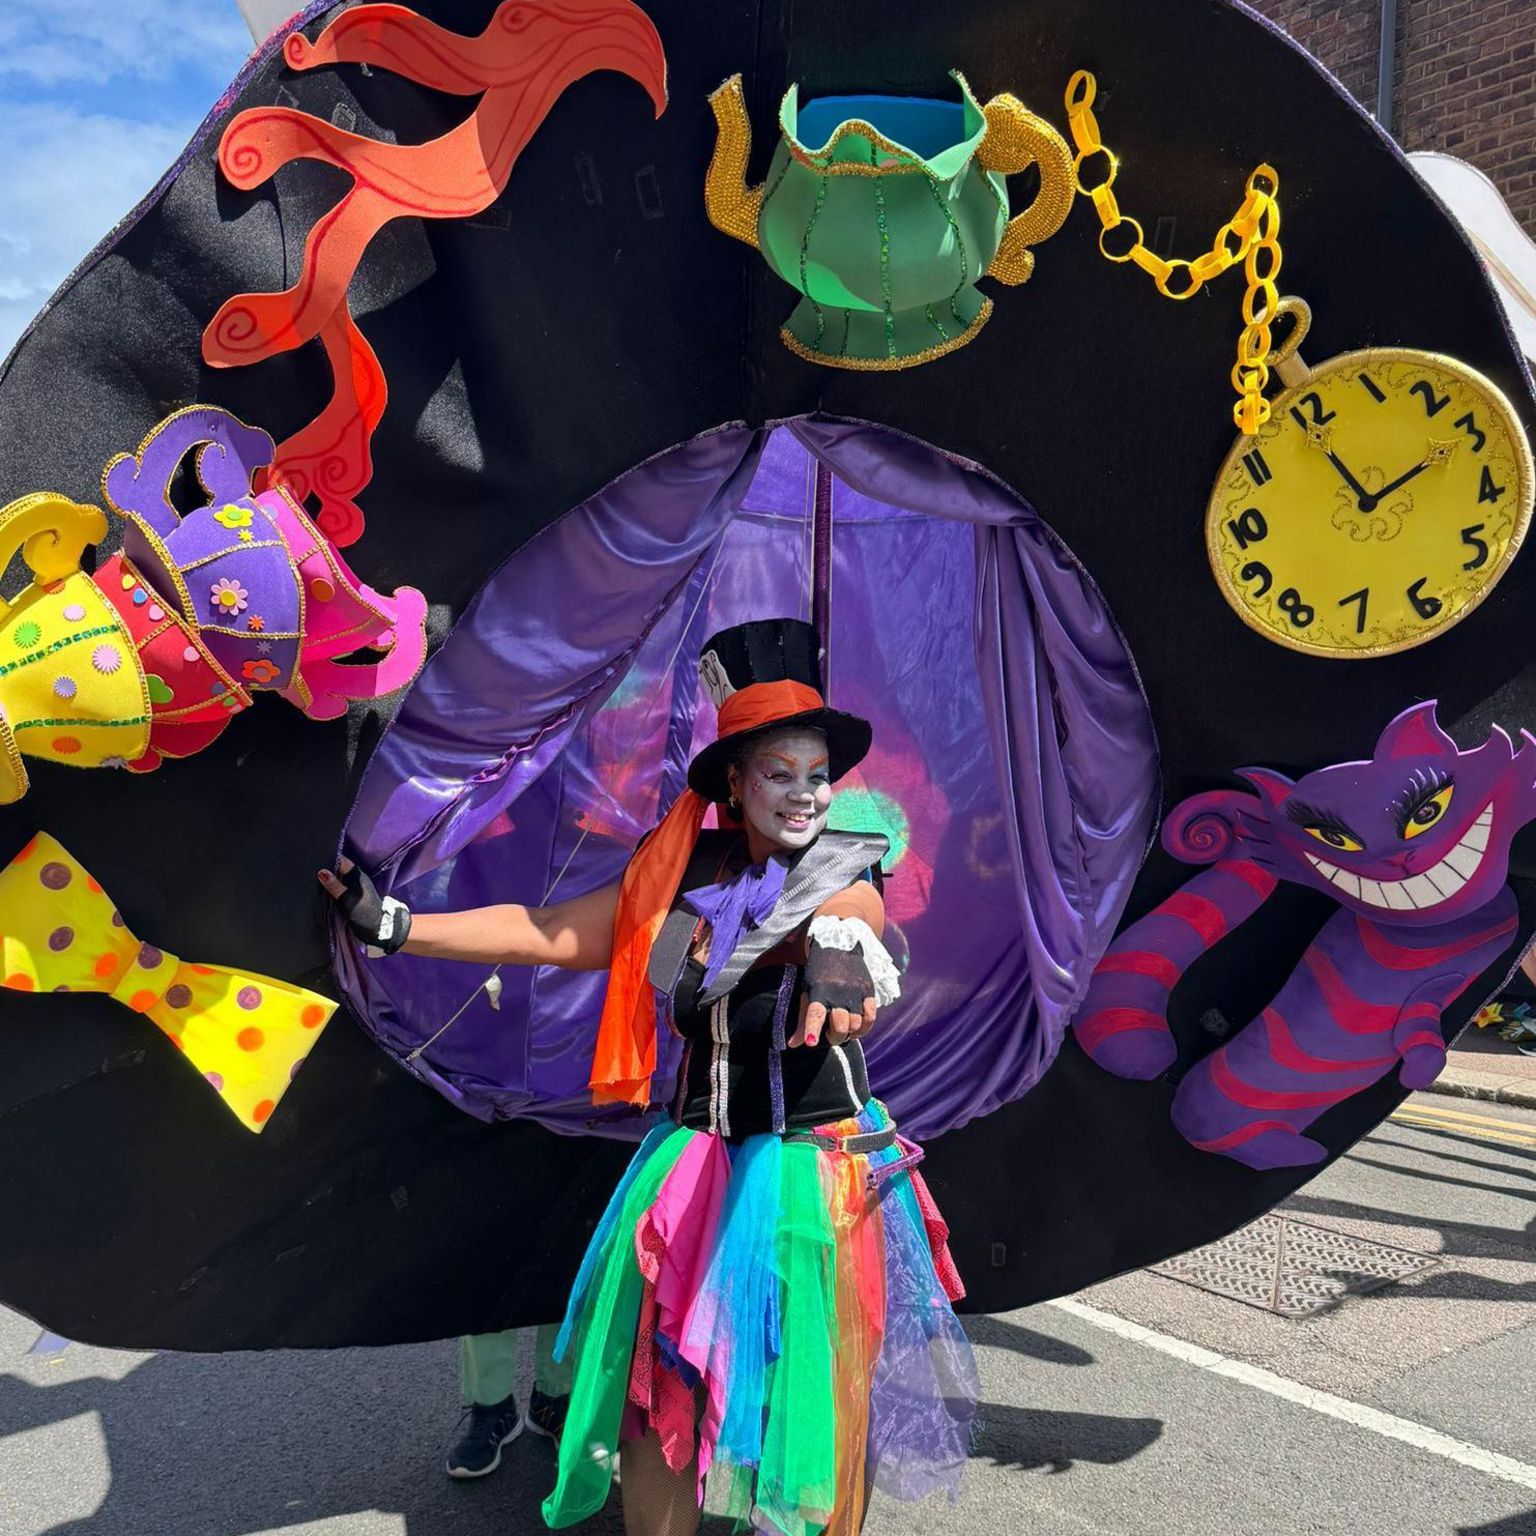 Maureen Drummond wearing an enormous hat costume which is three times her size, decorated with Alice in Wonderland characters and objects